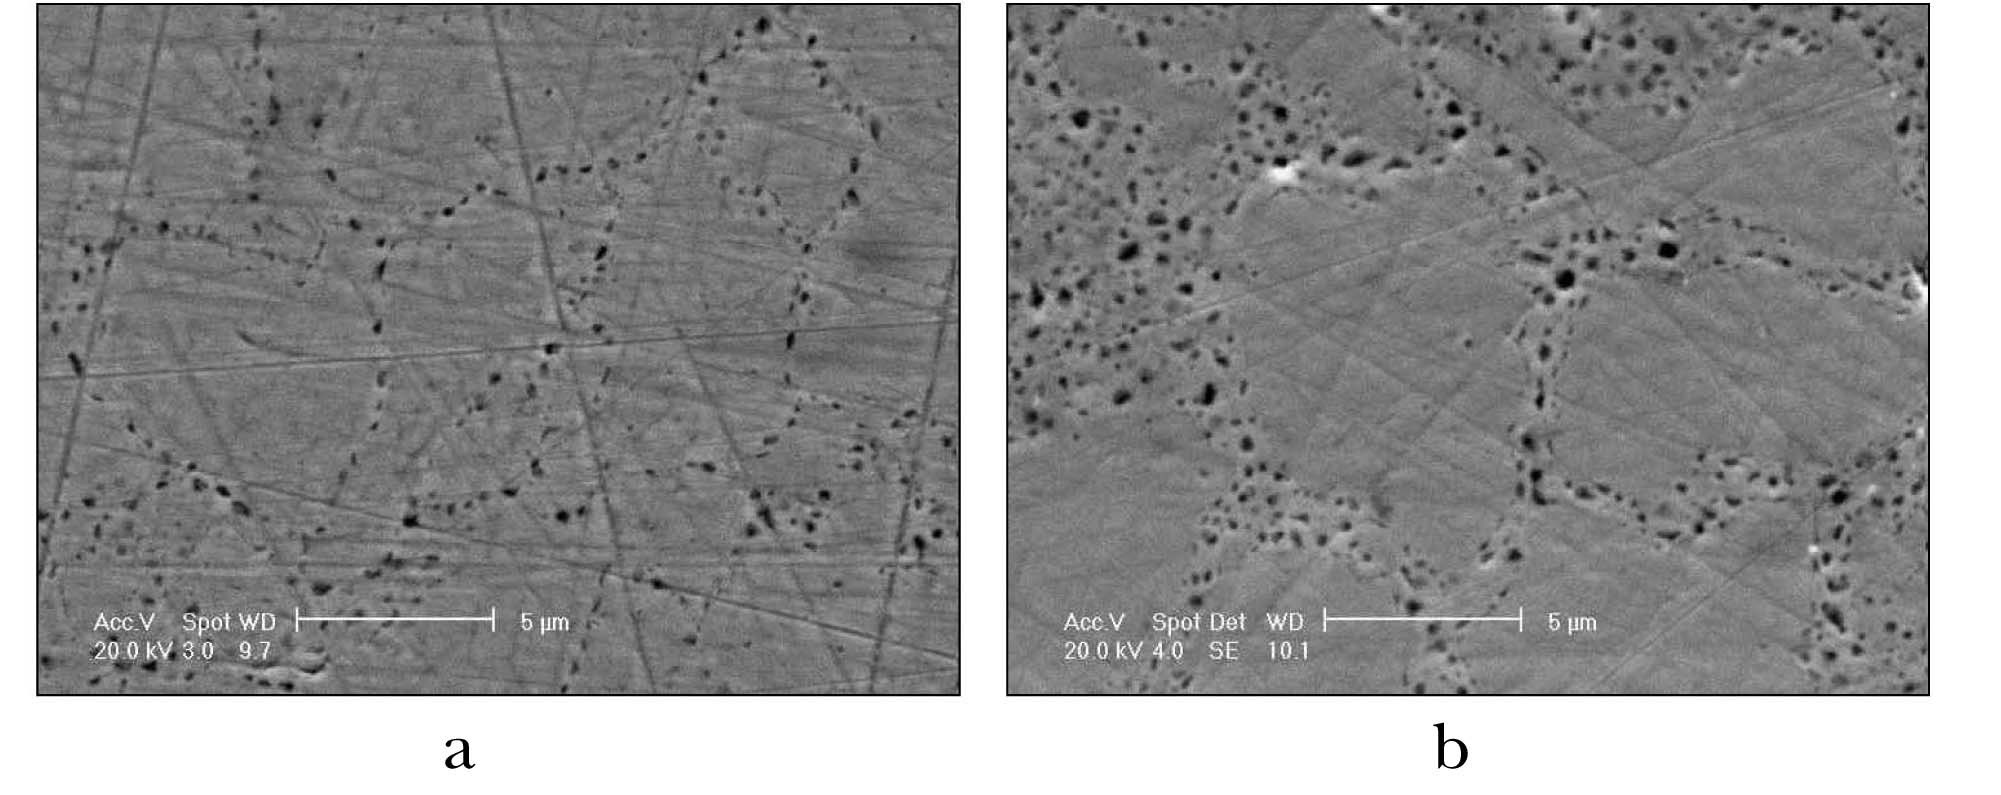 U-Mo Alloy Microstructure. Porosity Distribution in the Alloy: a ？ Fuel rod from the FA with an Average Burnup of ~40
%, b ？ Fuel Rod from the FA with an Average Burnup of ~50 %